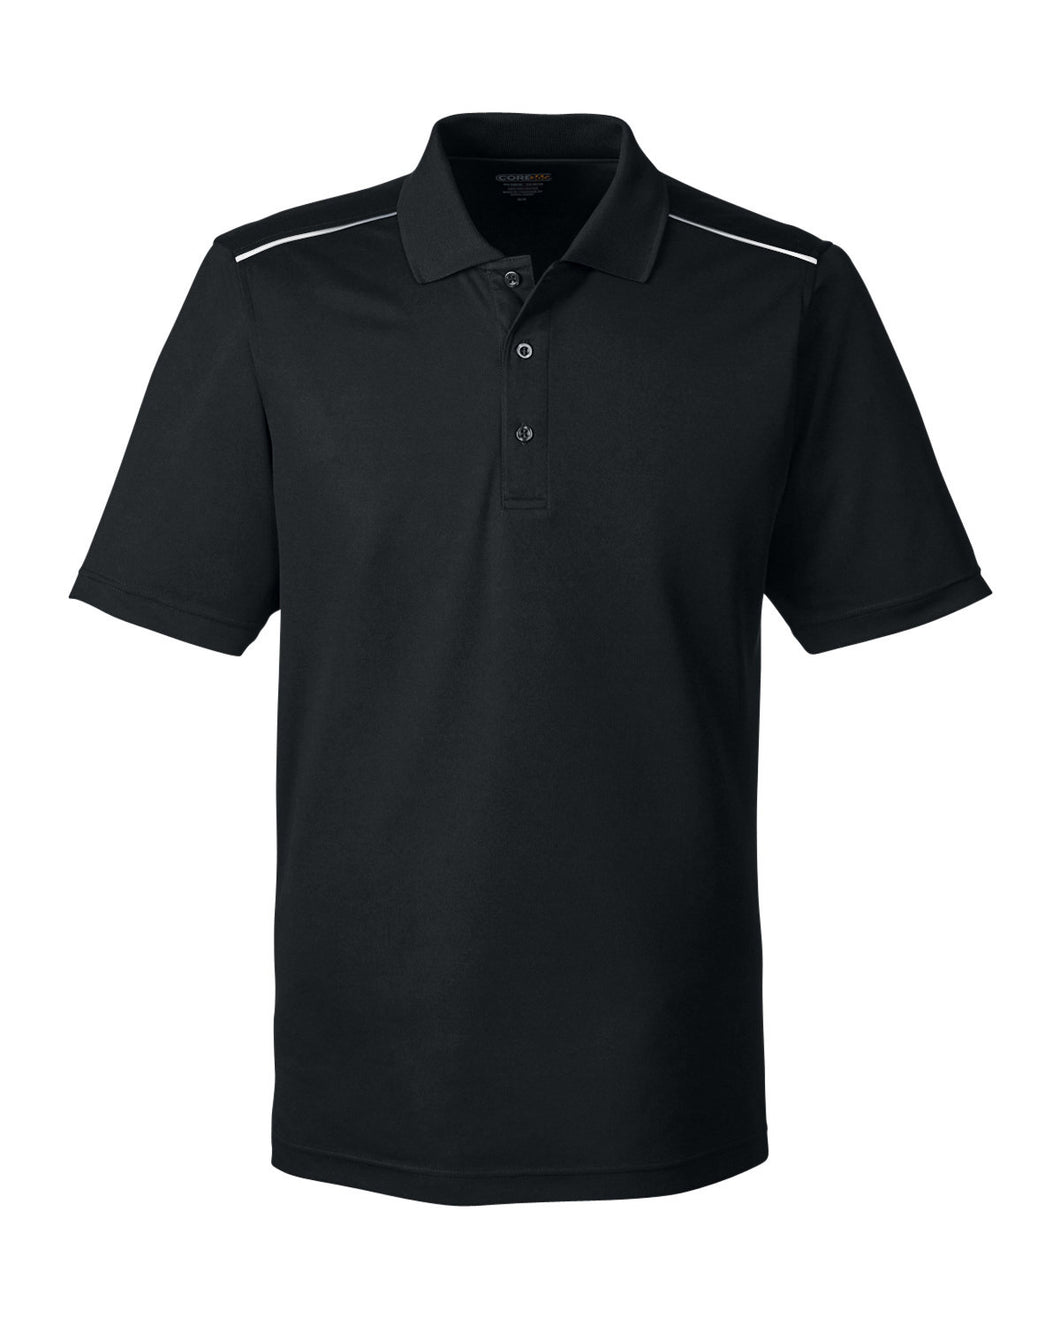 Core 365 Men's Radiant Performance Piqué Polo with Reflective Piping